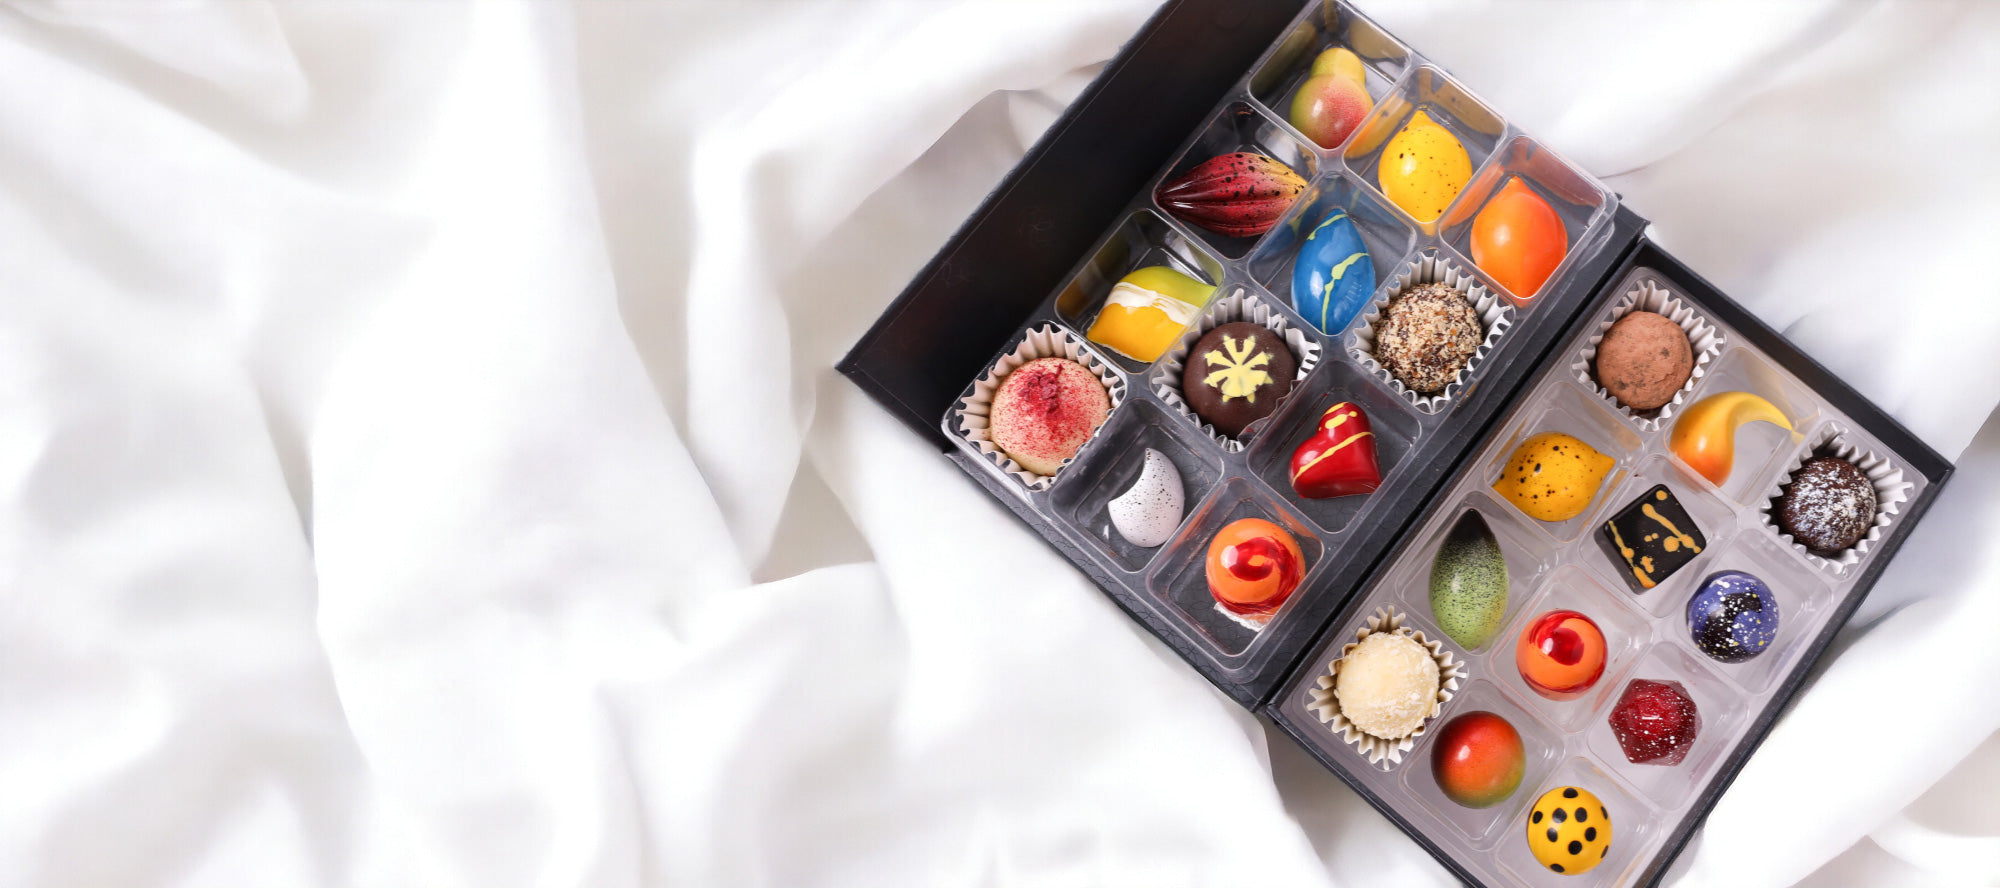 Constellation luxury chocolate gift box with 24 hand-painted sugar free chocolates and truffles